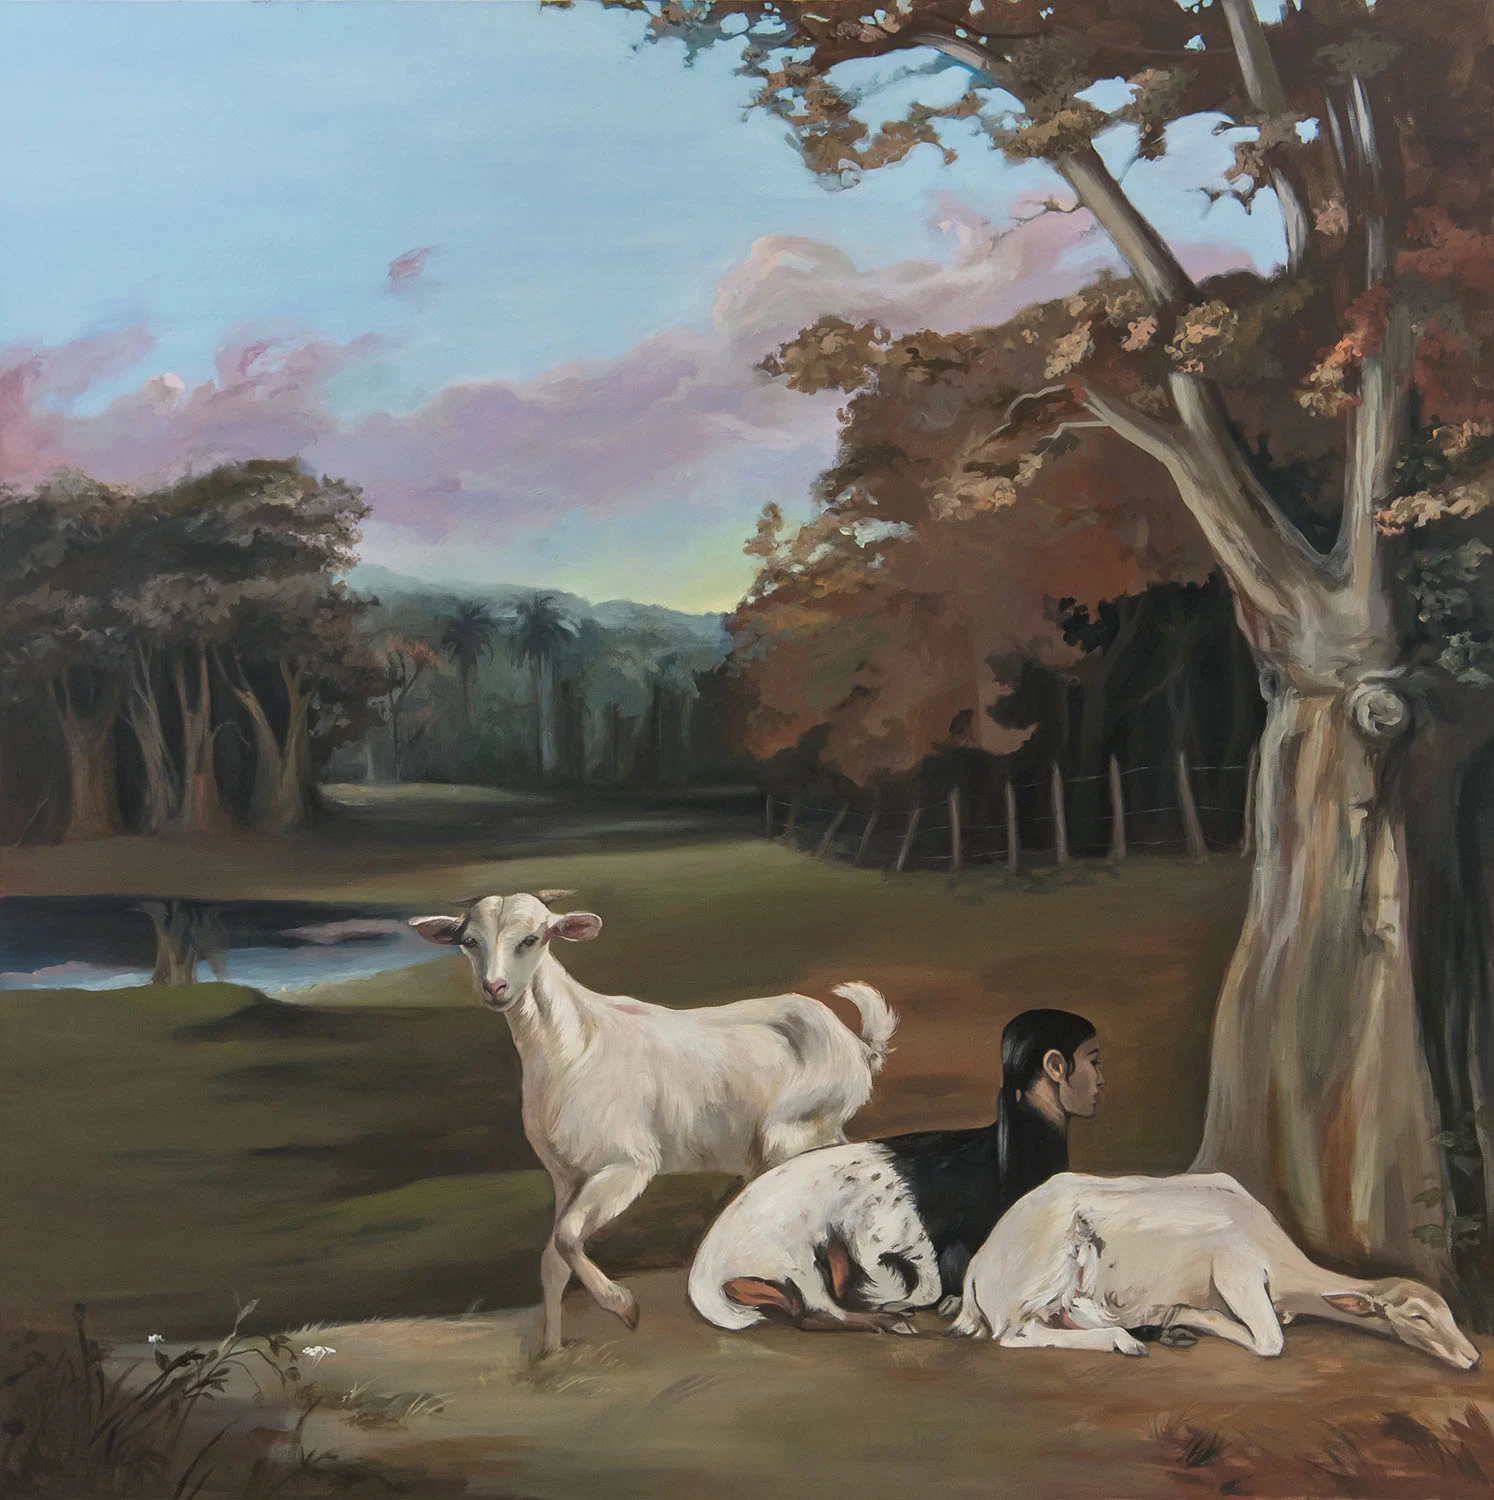 An acrylic painting depicting a chimera with the body of a multicolored goat and the head of an Arabic woman, sitting between two white goats in front of a vernacular wooded landscape.